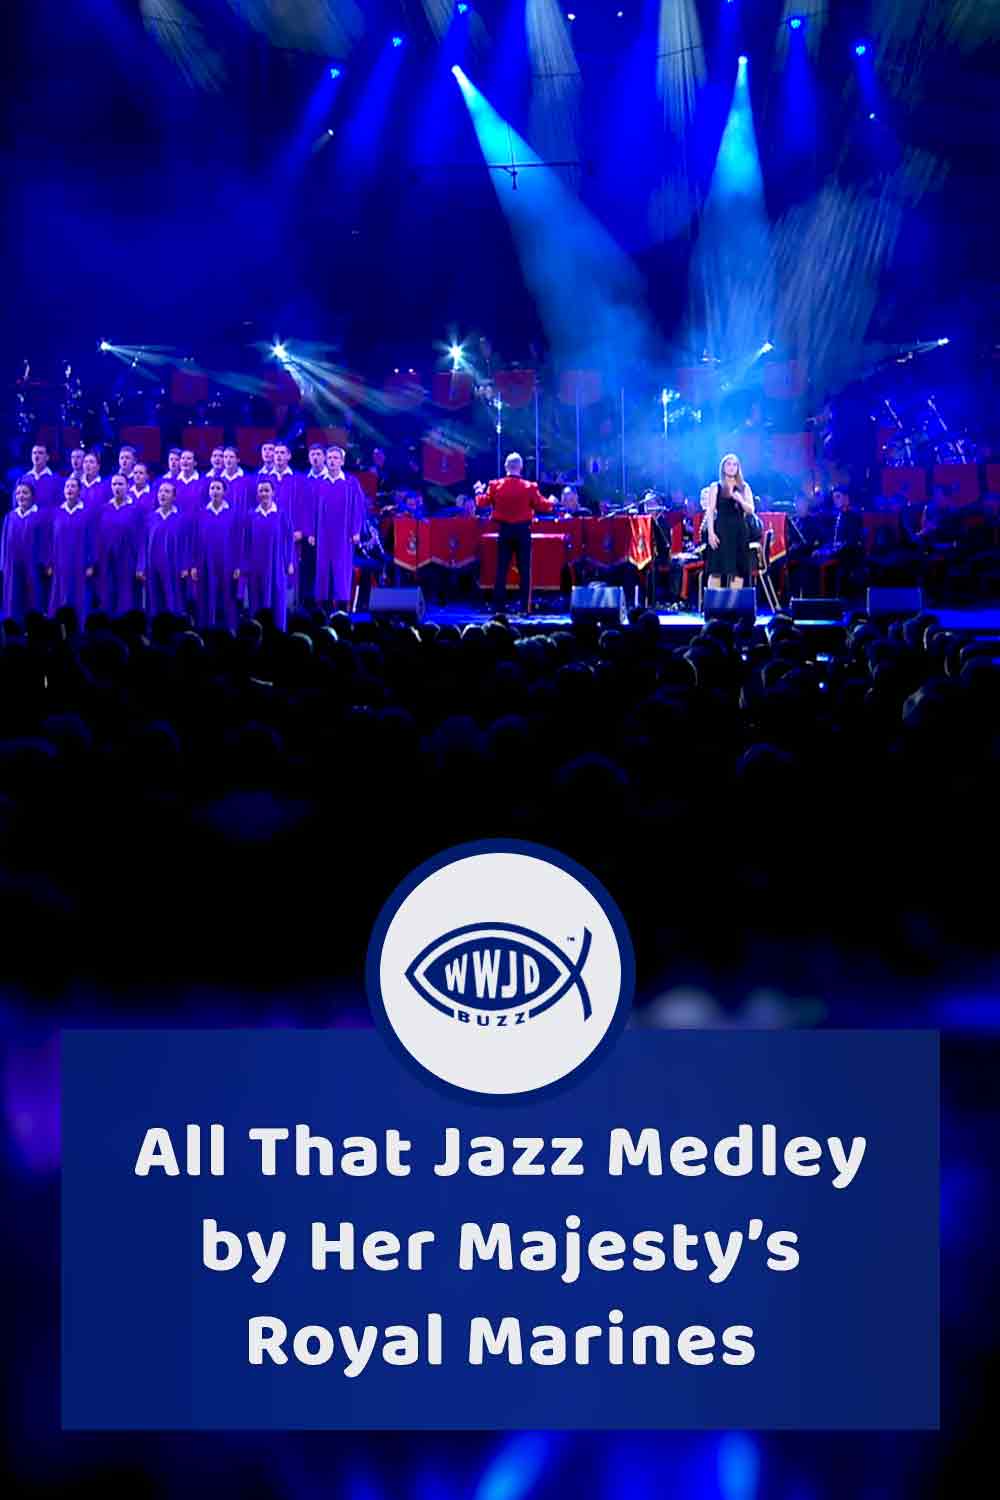 All That Jazz Medley by Her Majesty’s Royal Marines